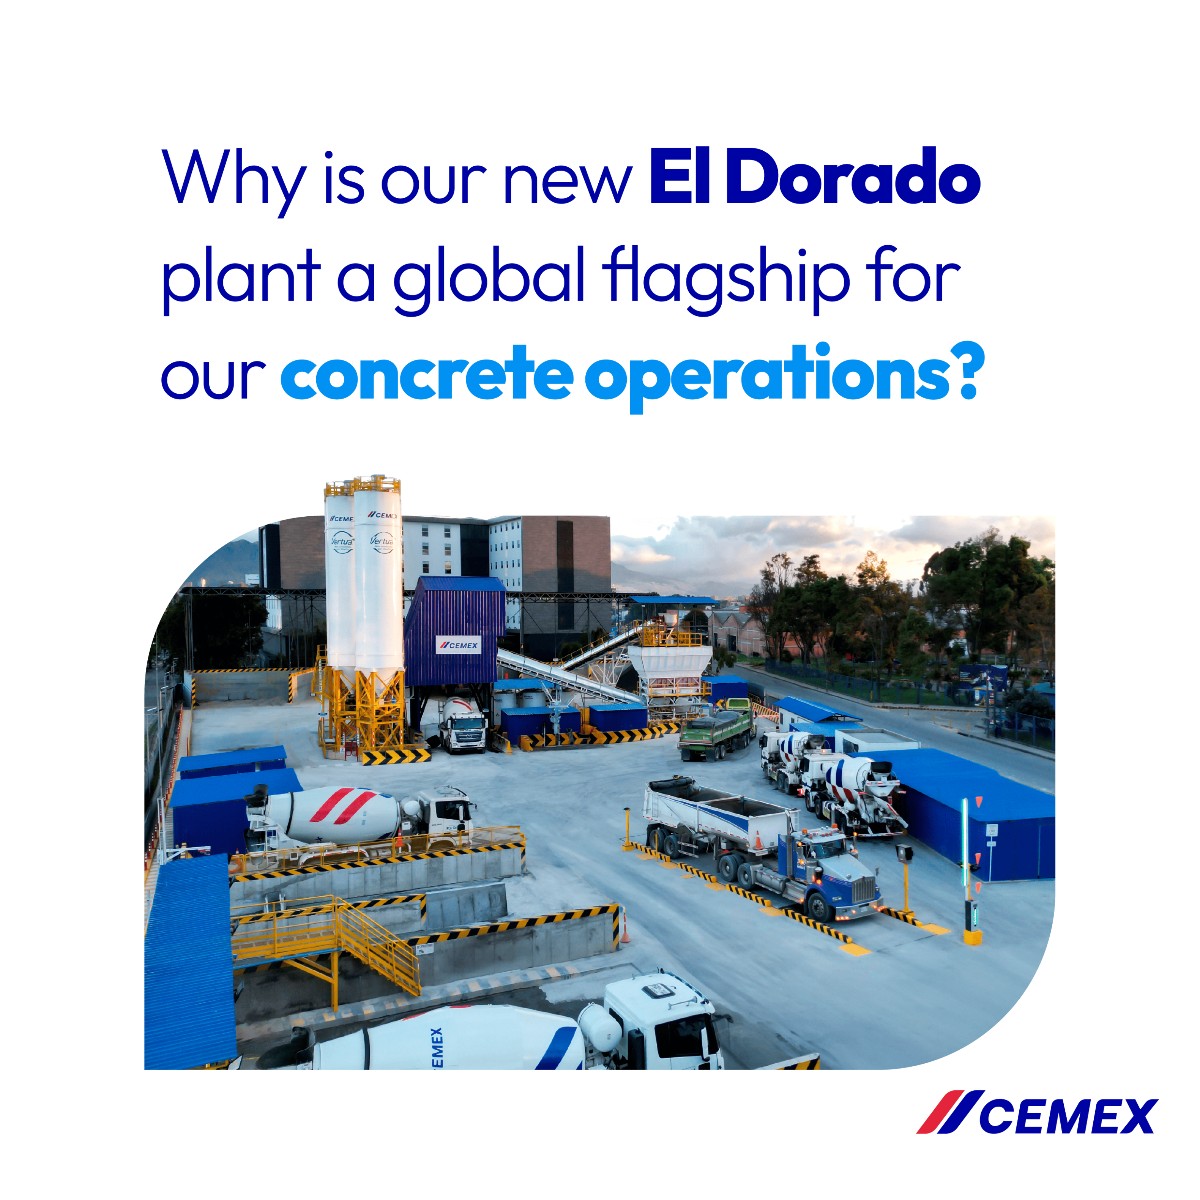 🏗️ Meet El Dorado, our latest concrete plant in Colombia! Through its environmental management, safety standards, and inclusive practices, this plant has become a flagship for our concrete operations worldwide.